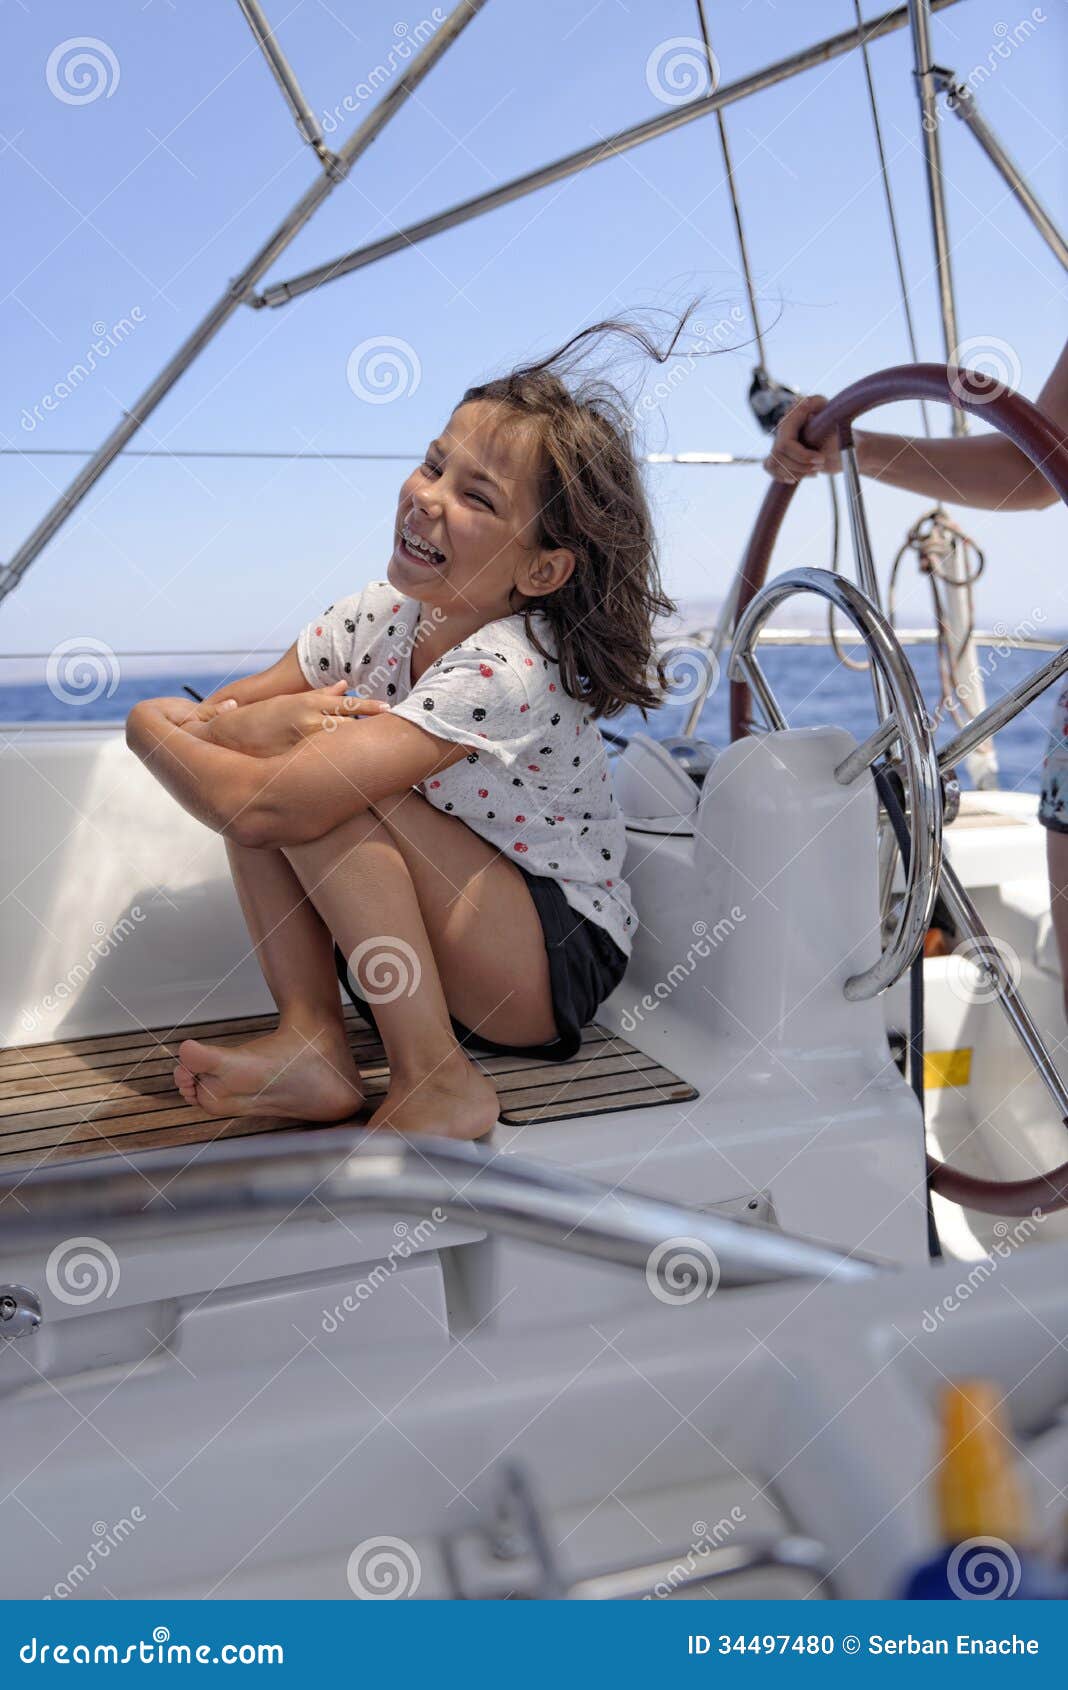 Girl on a sailing boat stock photo. Image of white 